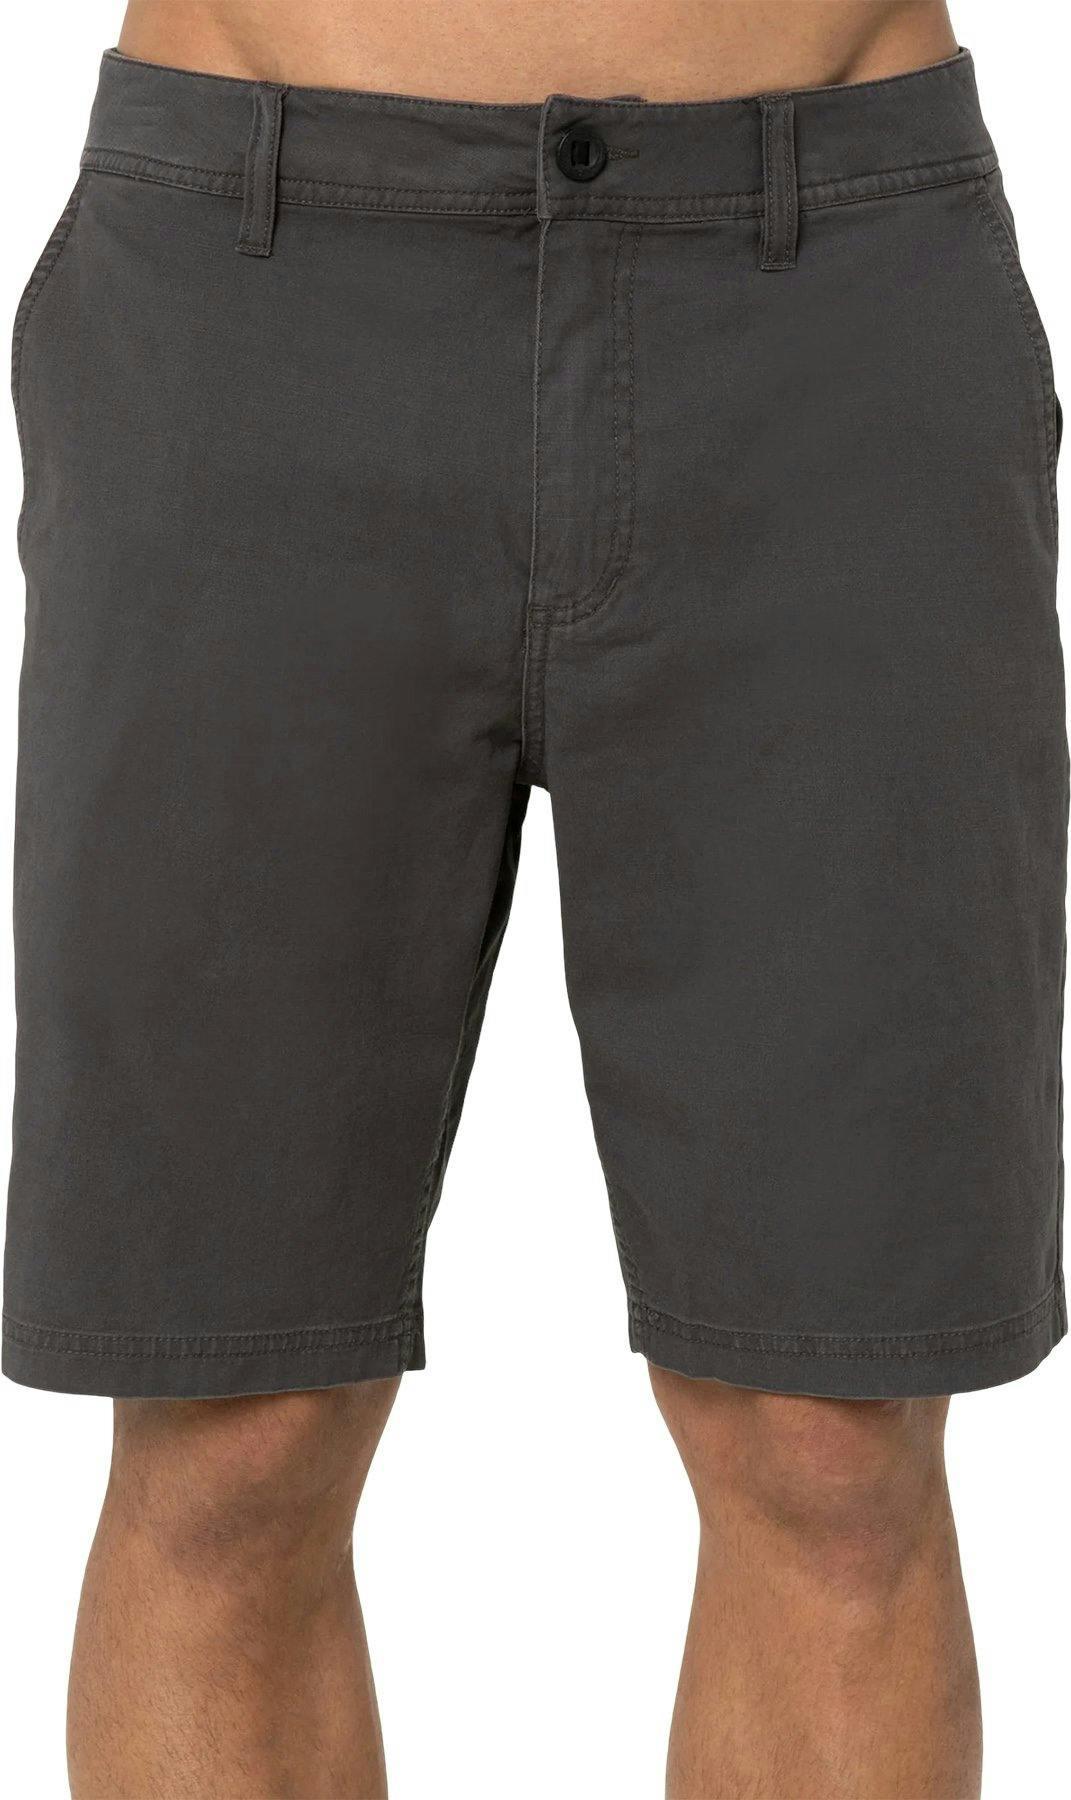 Product image for Contact Stretch Short - Men's